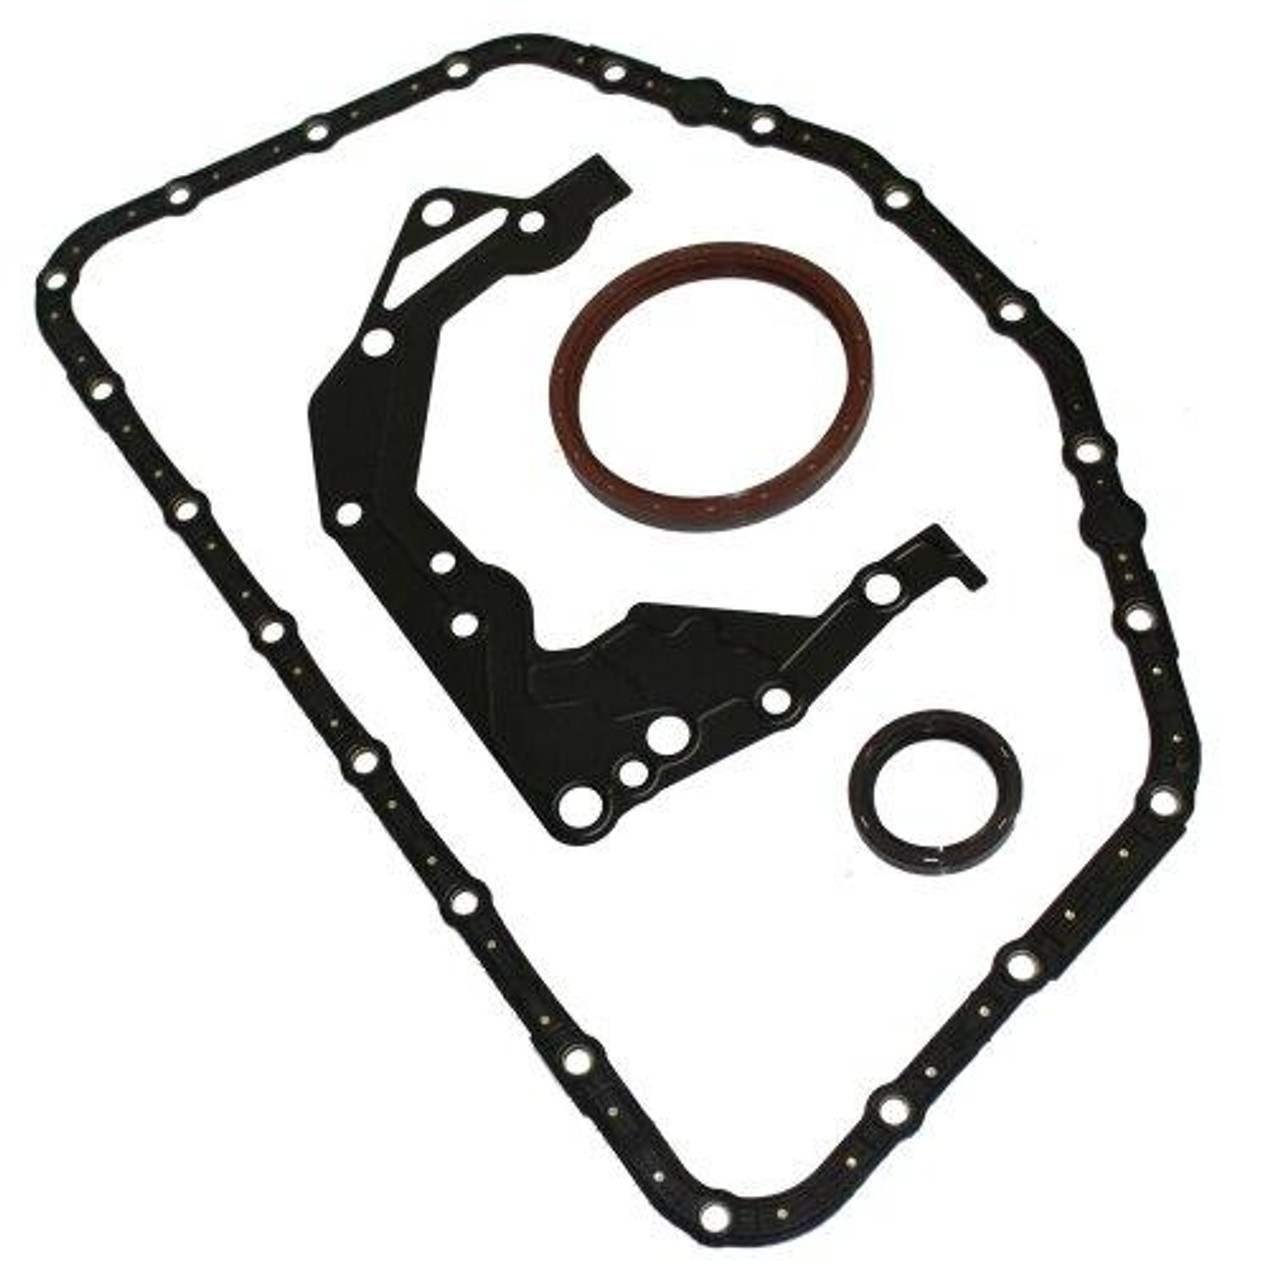 Lower Gasket Set - 1998 Cadillac Catera 3.0L Engine Parts # LGS3105ZE2